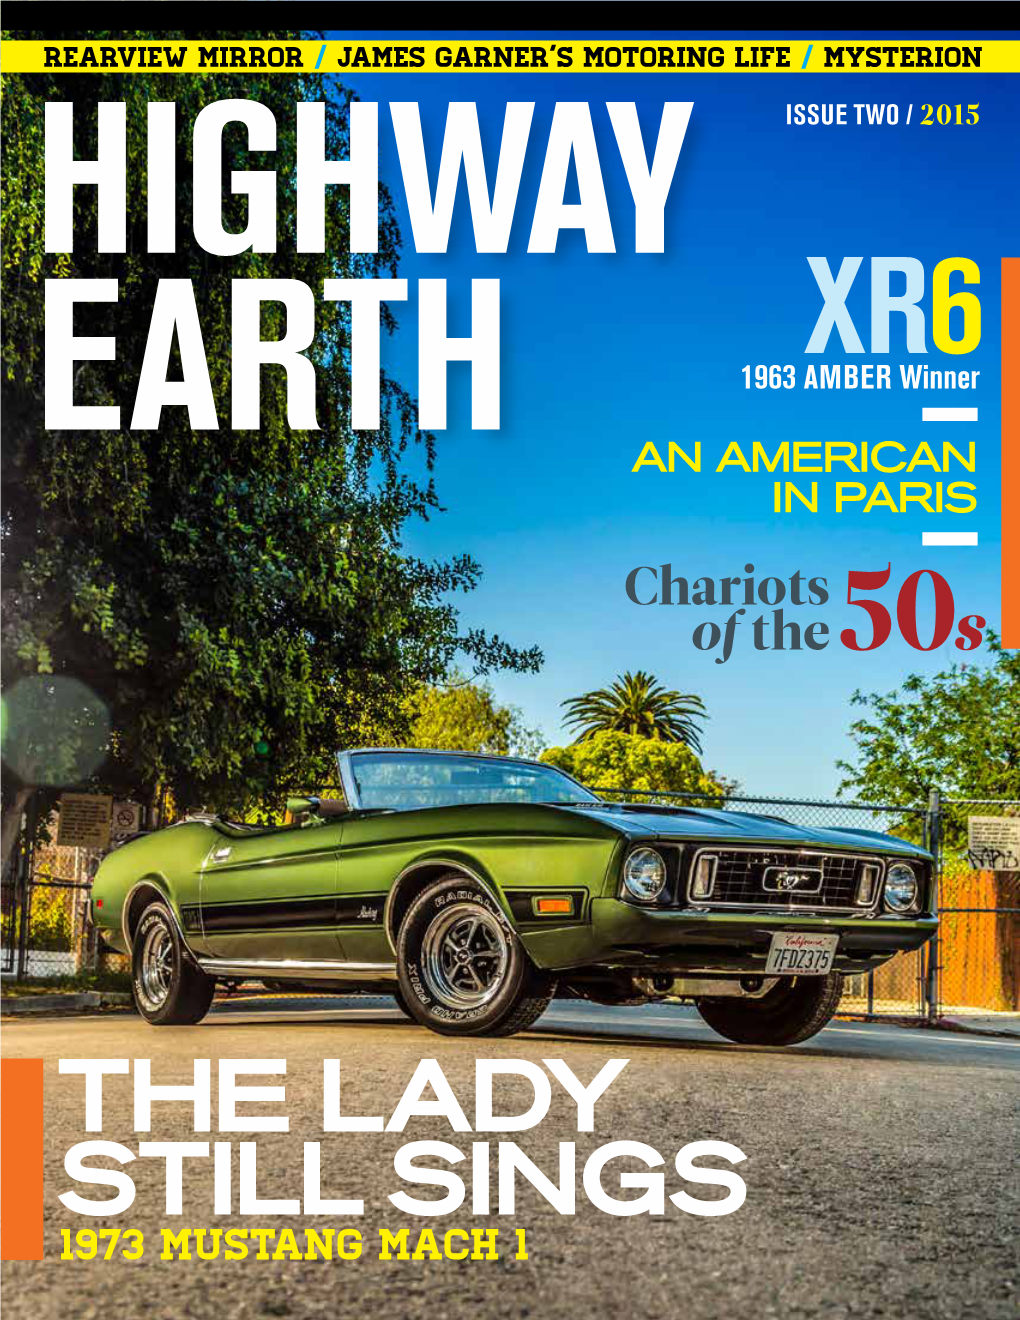 THE LADY STILL SINGS 1973 Mustang Mach 1 Highway Earth/2015